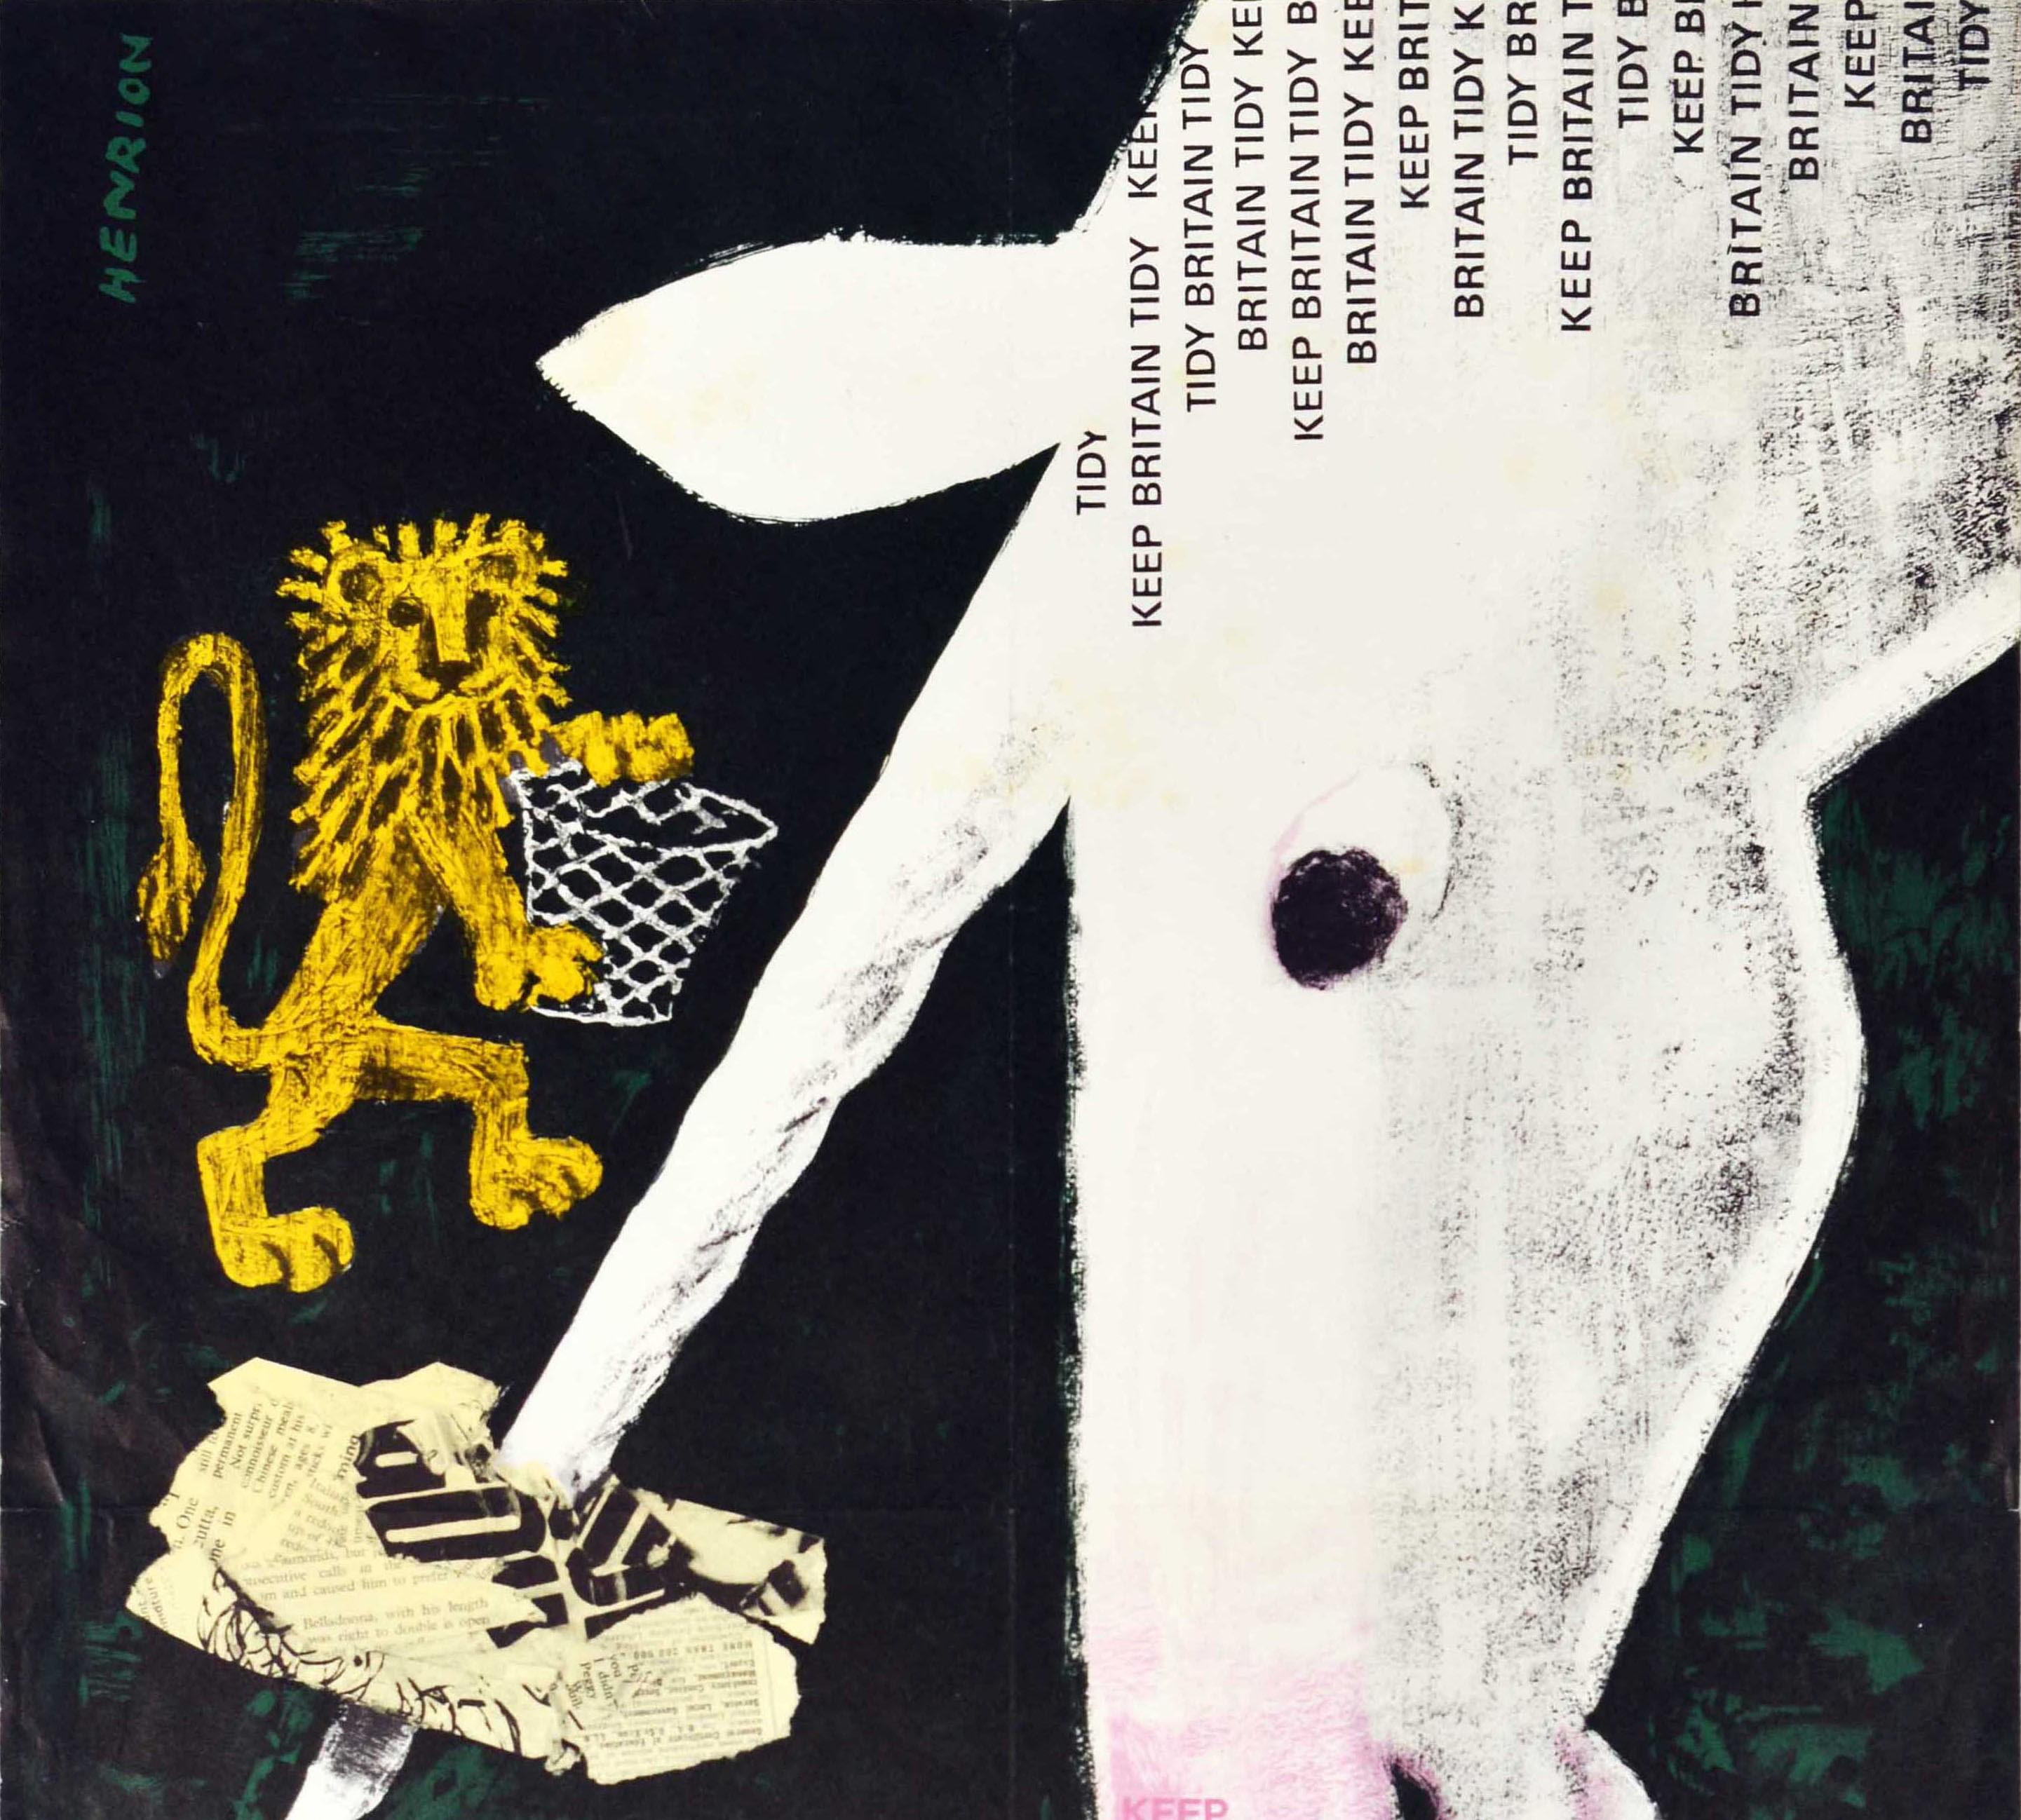 Original vintage propaganda poster against litter and rubbish with the text Keep Britain Tidy on a white unicorn picking up a discarded paper to throw in a bin held by a lion, representing the heraldic symbols of the United Kingdom (the lion for